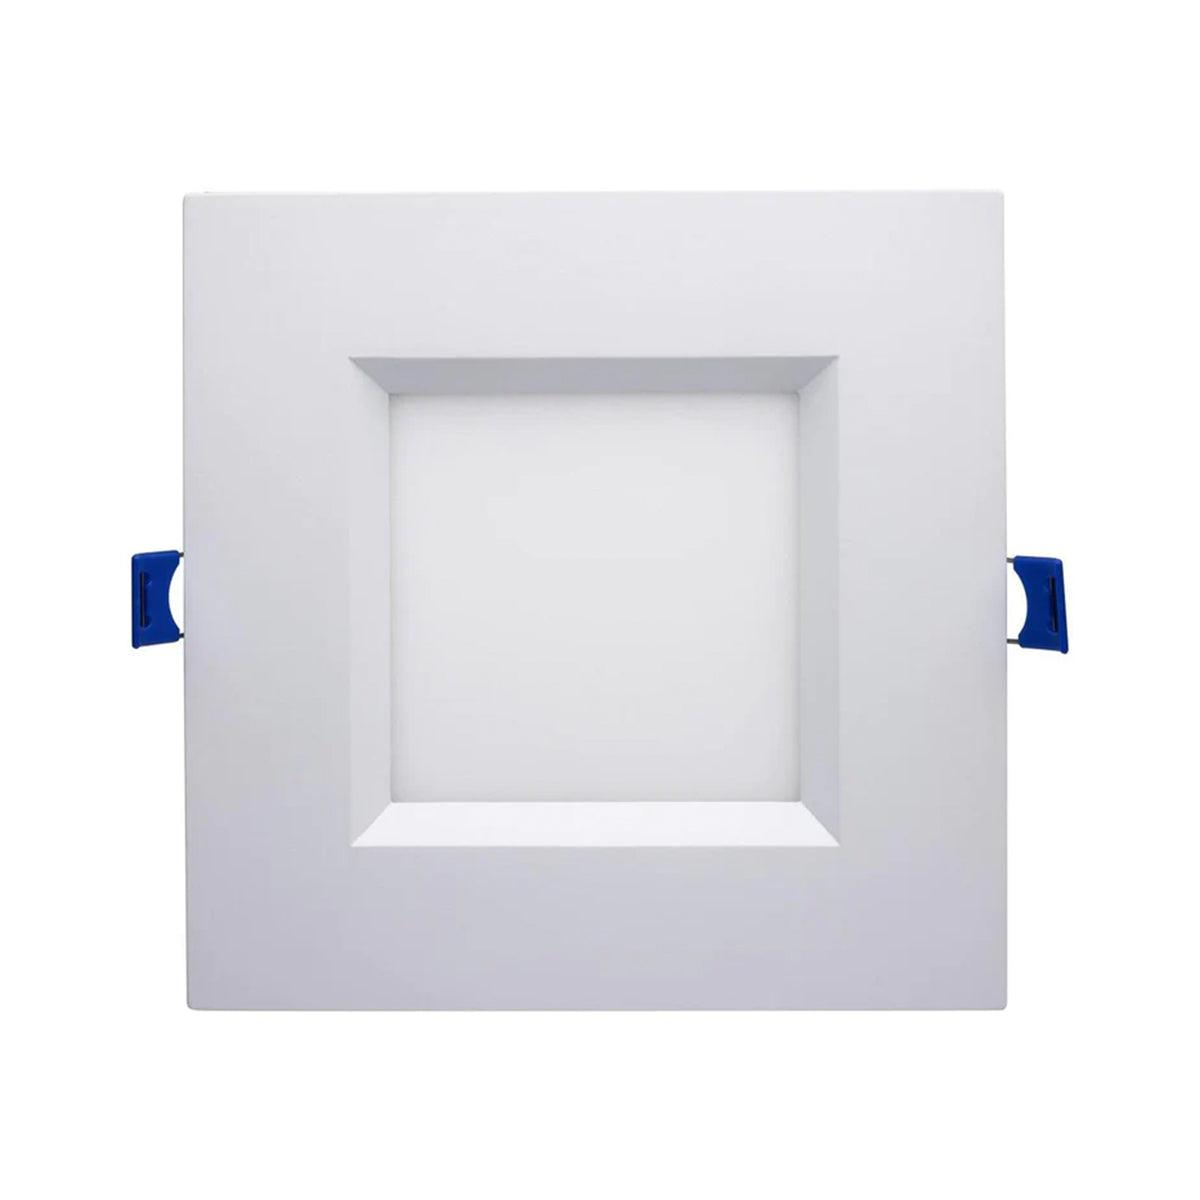 Slim Fit Canless LED Recessed Light, 5 Inch, Square, 15 Watt, 1000 Lumens, Selectable CCT, 2700K to 5000K, Ultra Thin